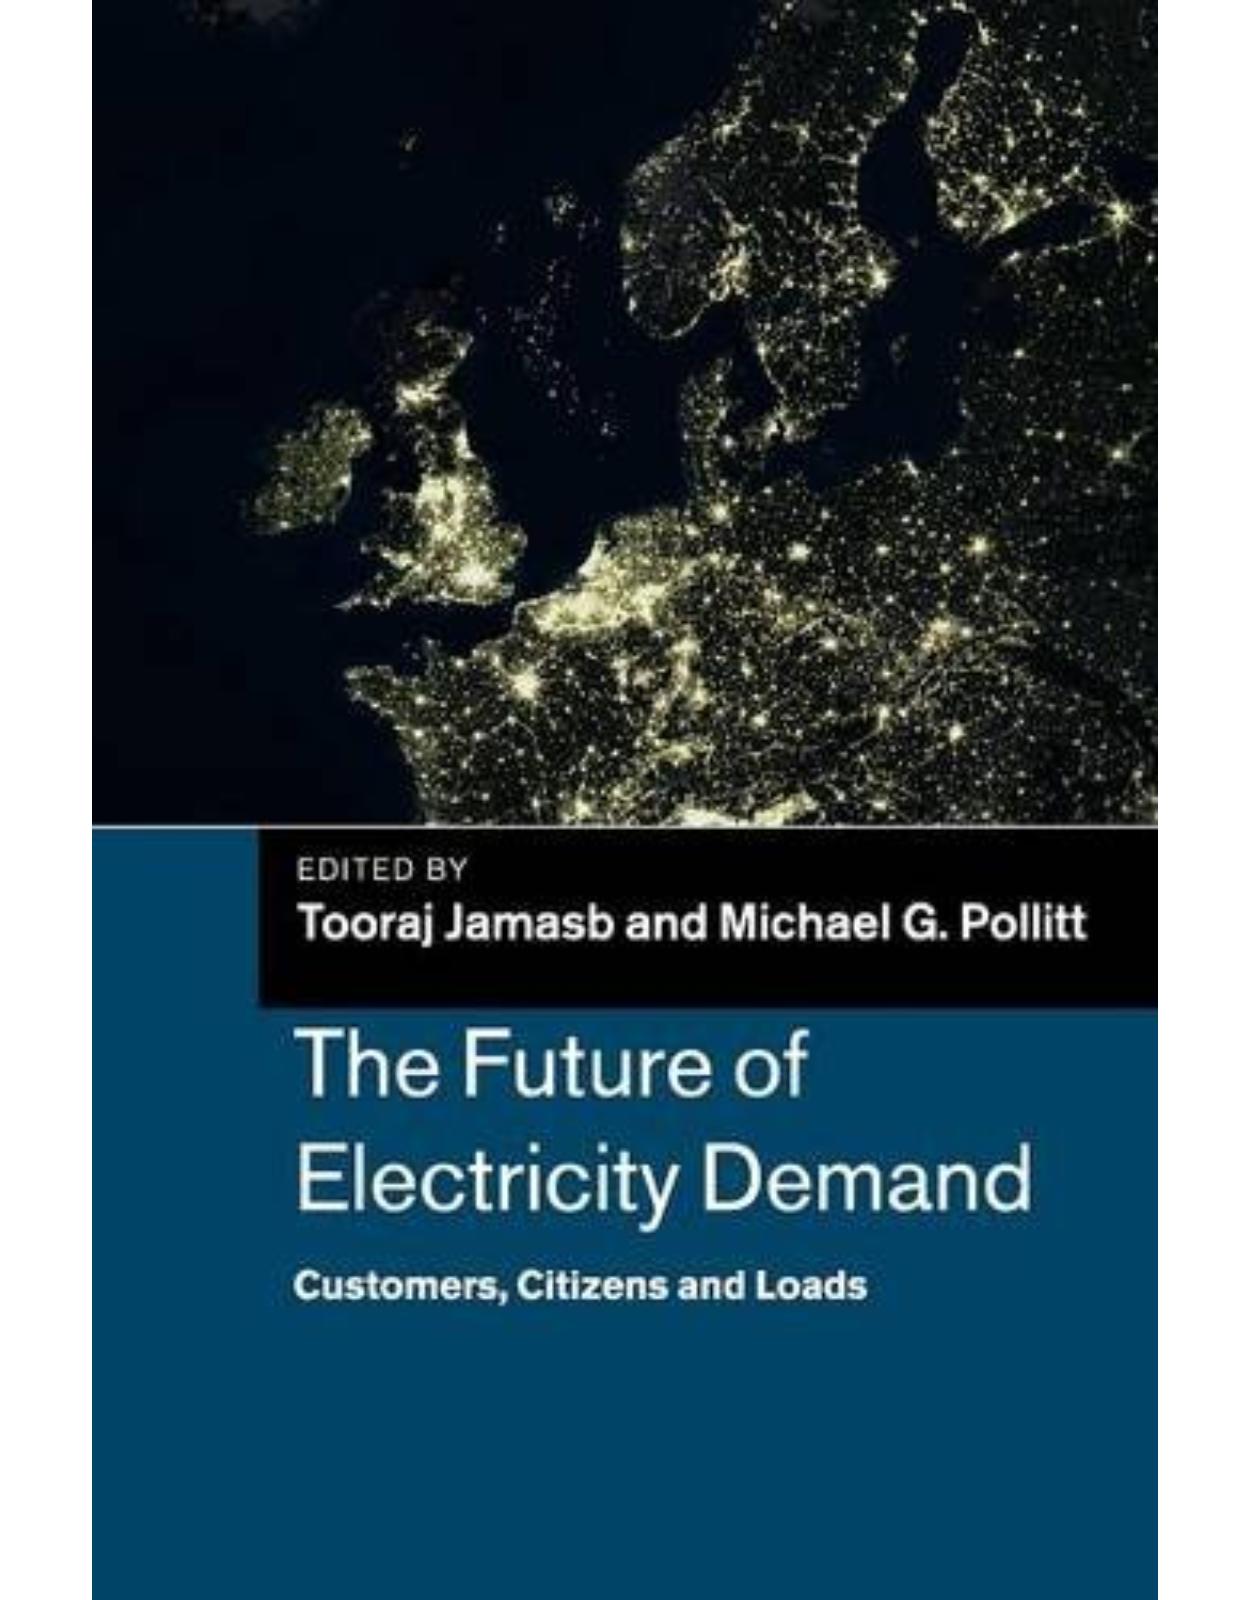 The Future of Electricity Demand: Customers, Citizens and Loads (Department of Applied Economics Occasional Papers)